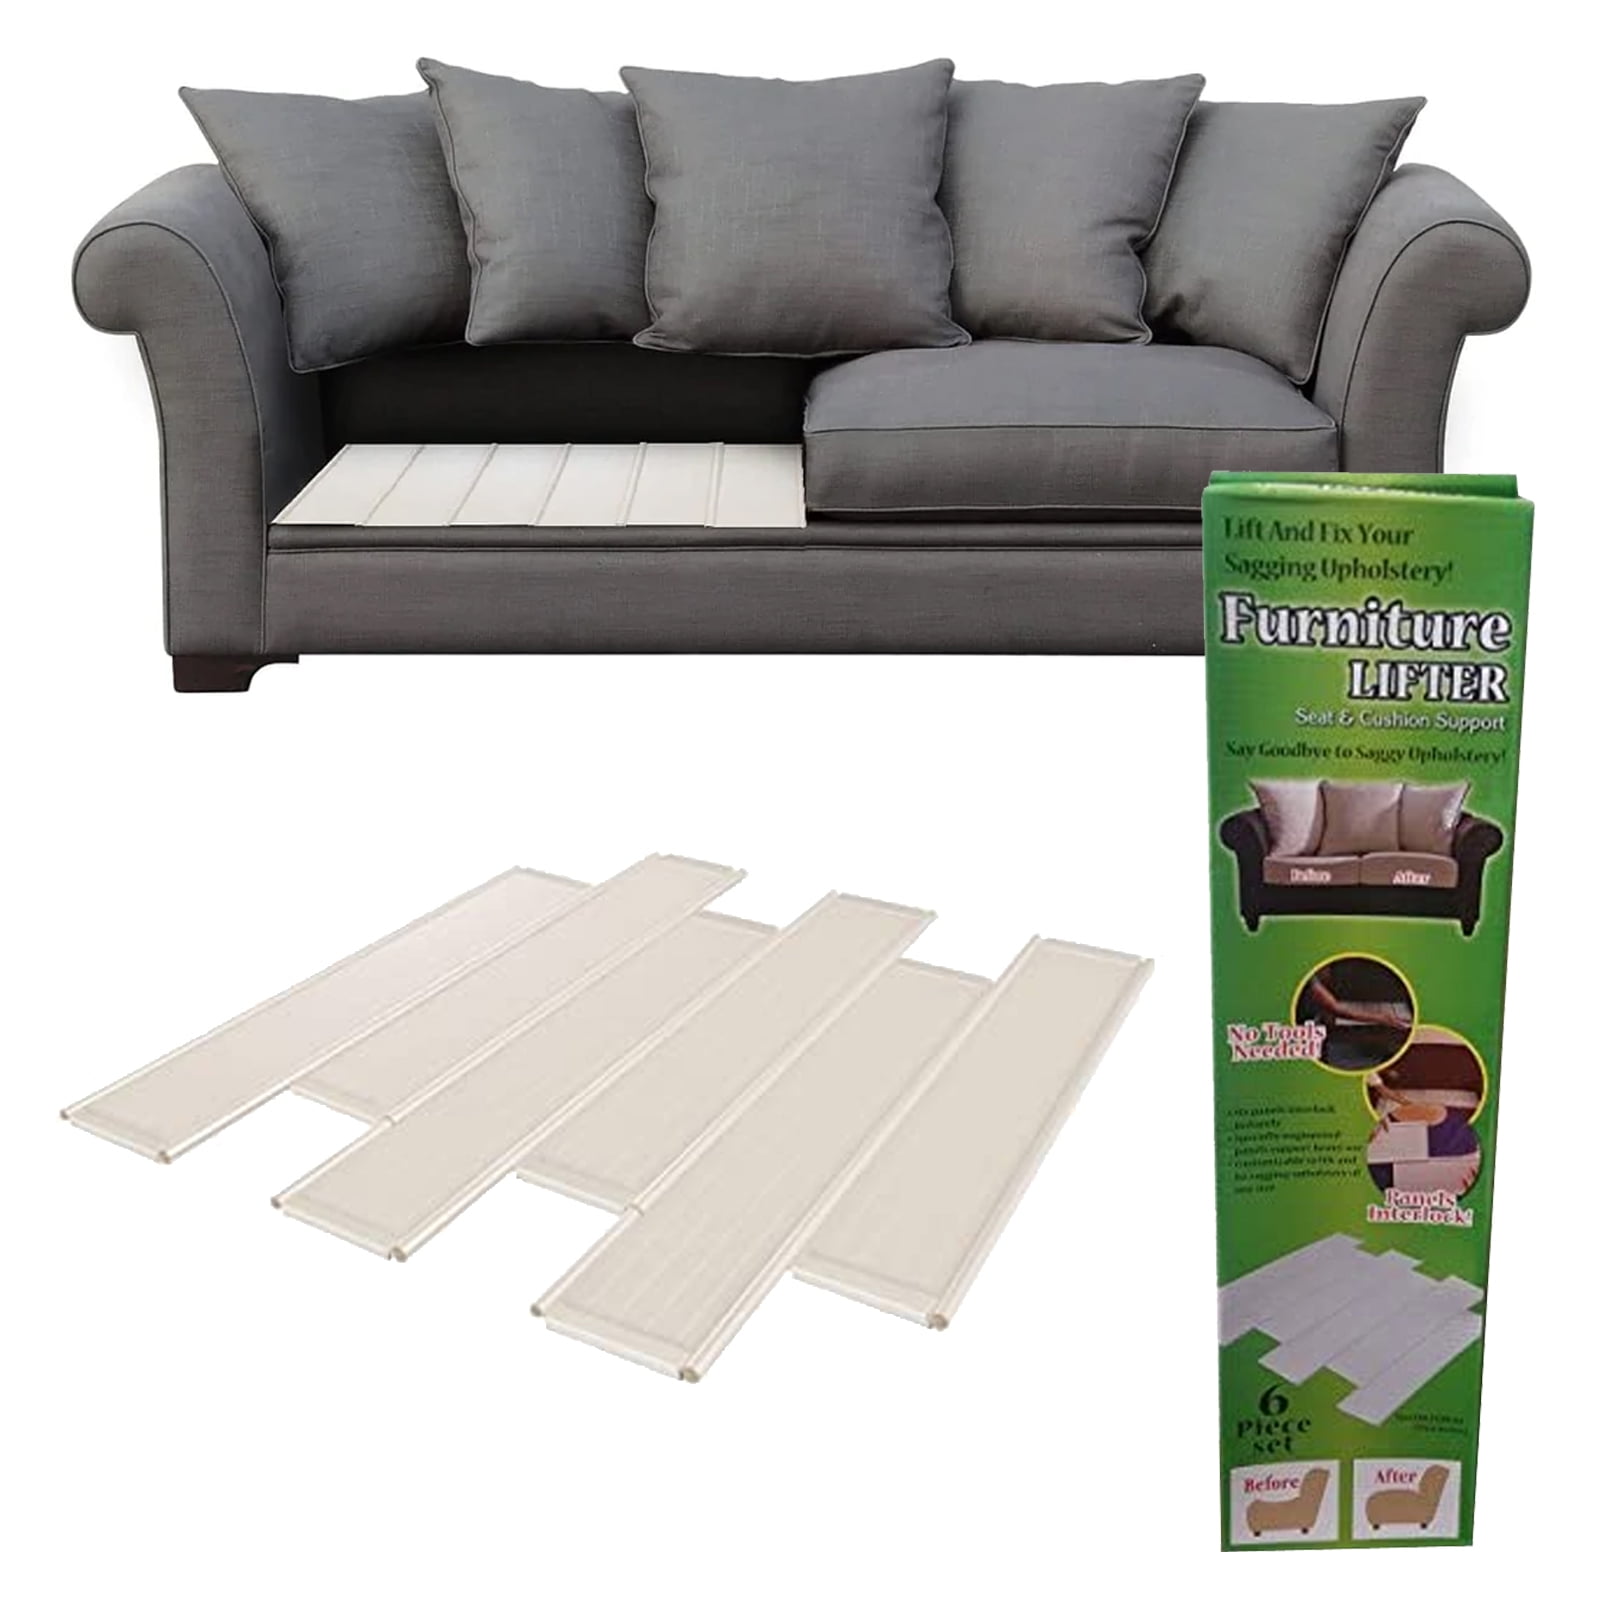 6 Pieces/pack Of Pvc Furniture, Sofa Support Cushion, Fast Fixing